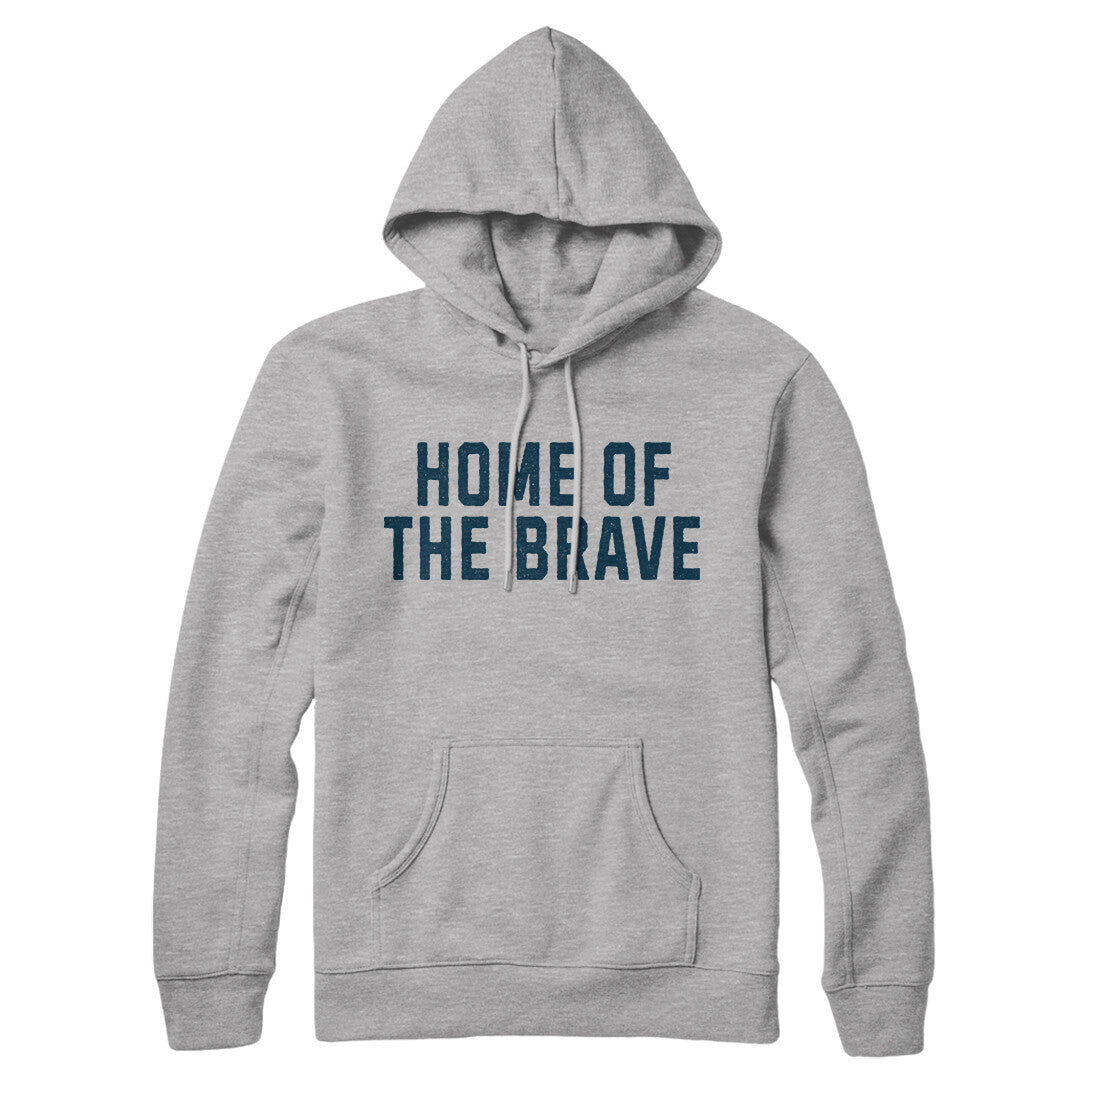 Home of the Brave in Heather Grey Color